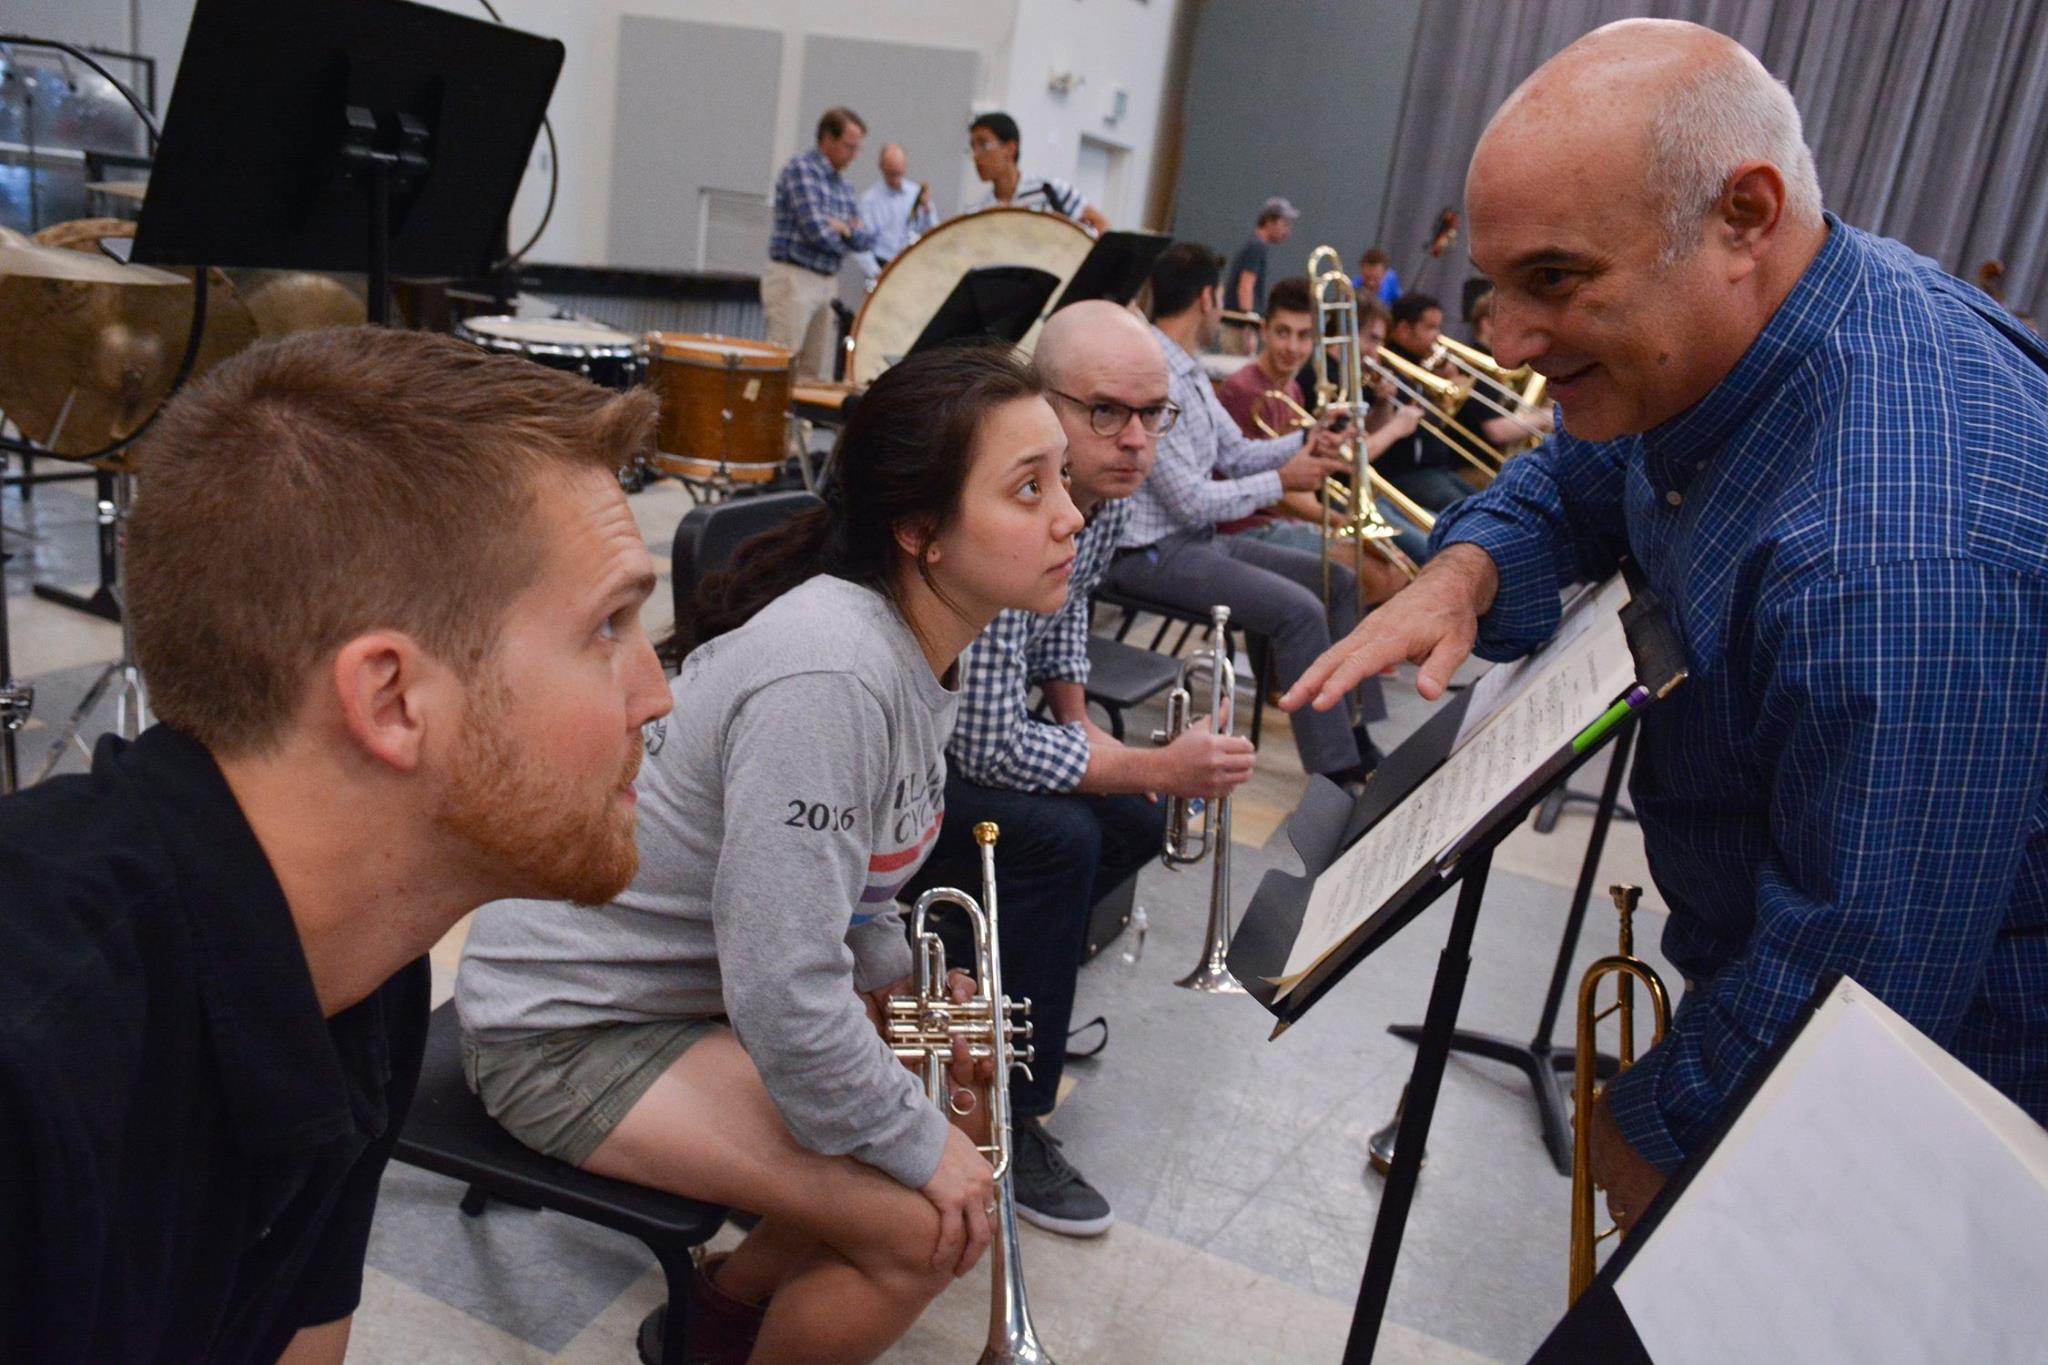 CU Boulder trumpet students receive teaching from a member of the Cleveland Orchestra